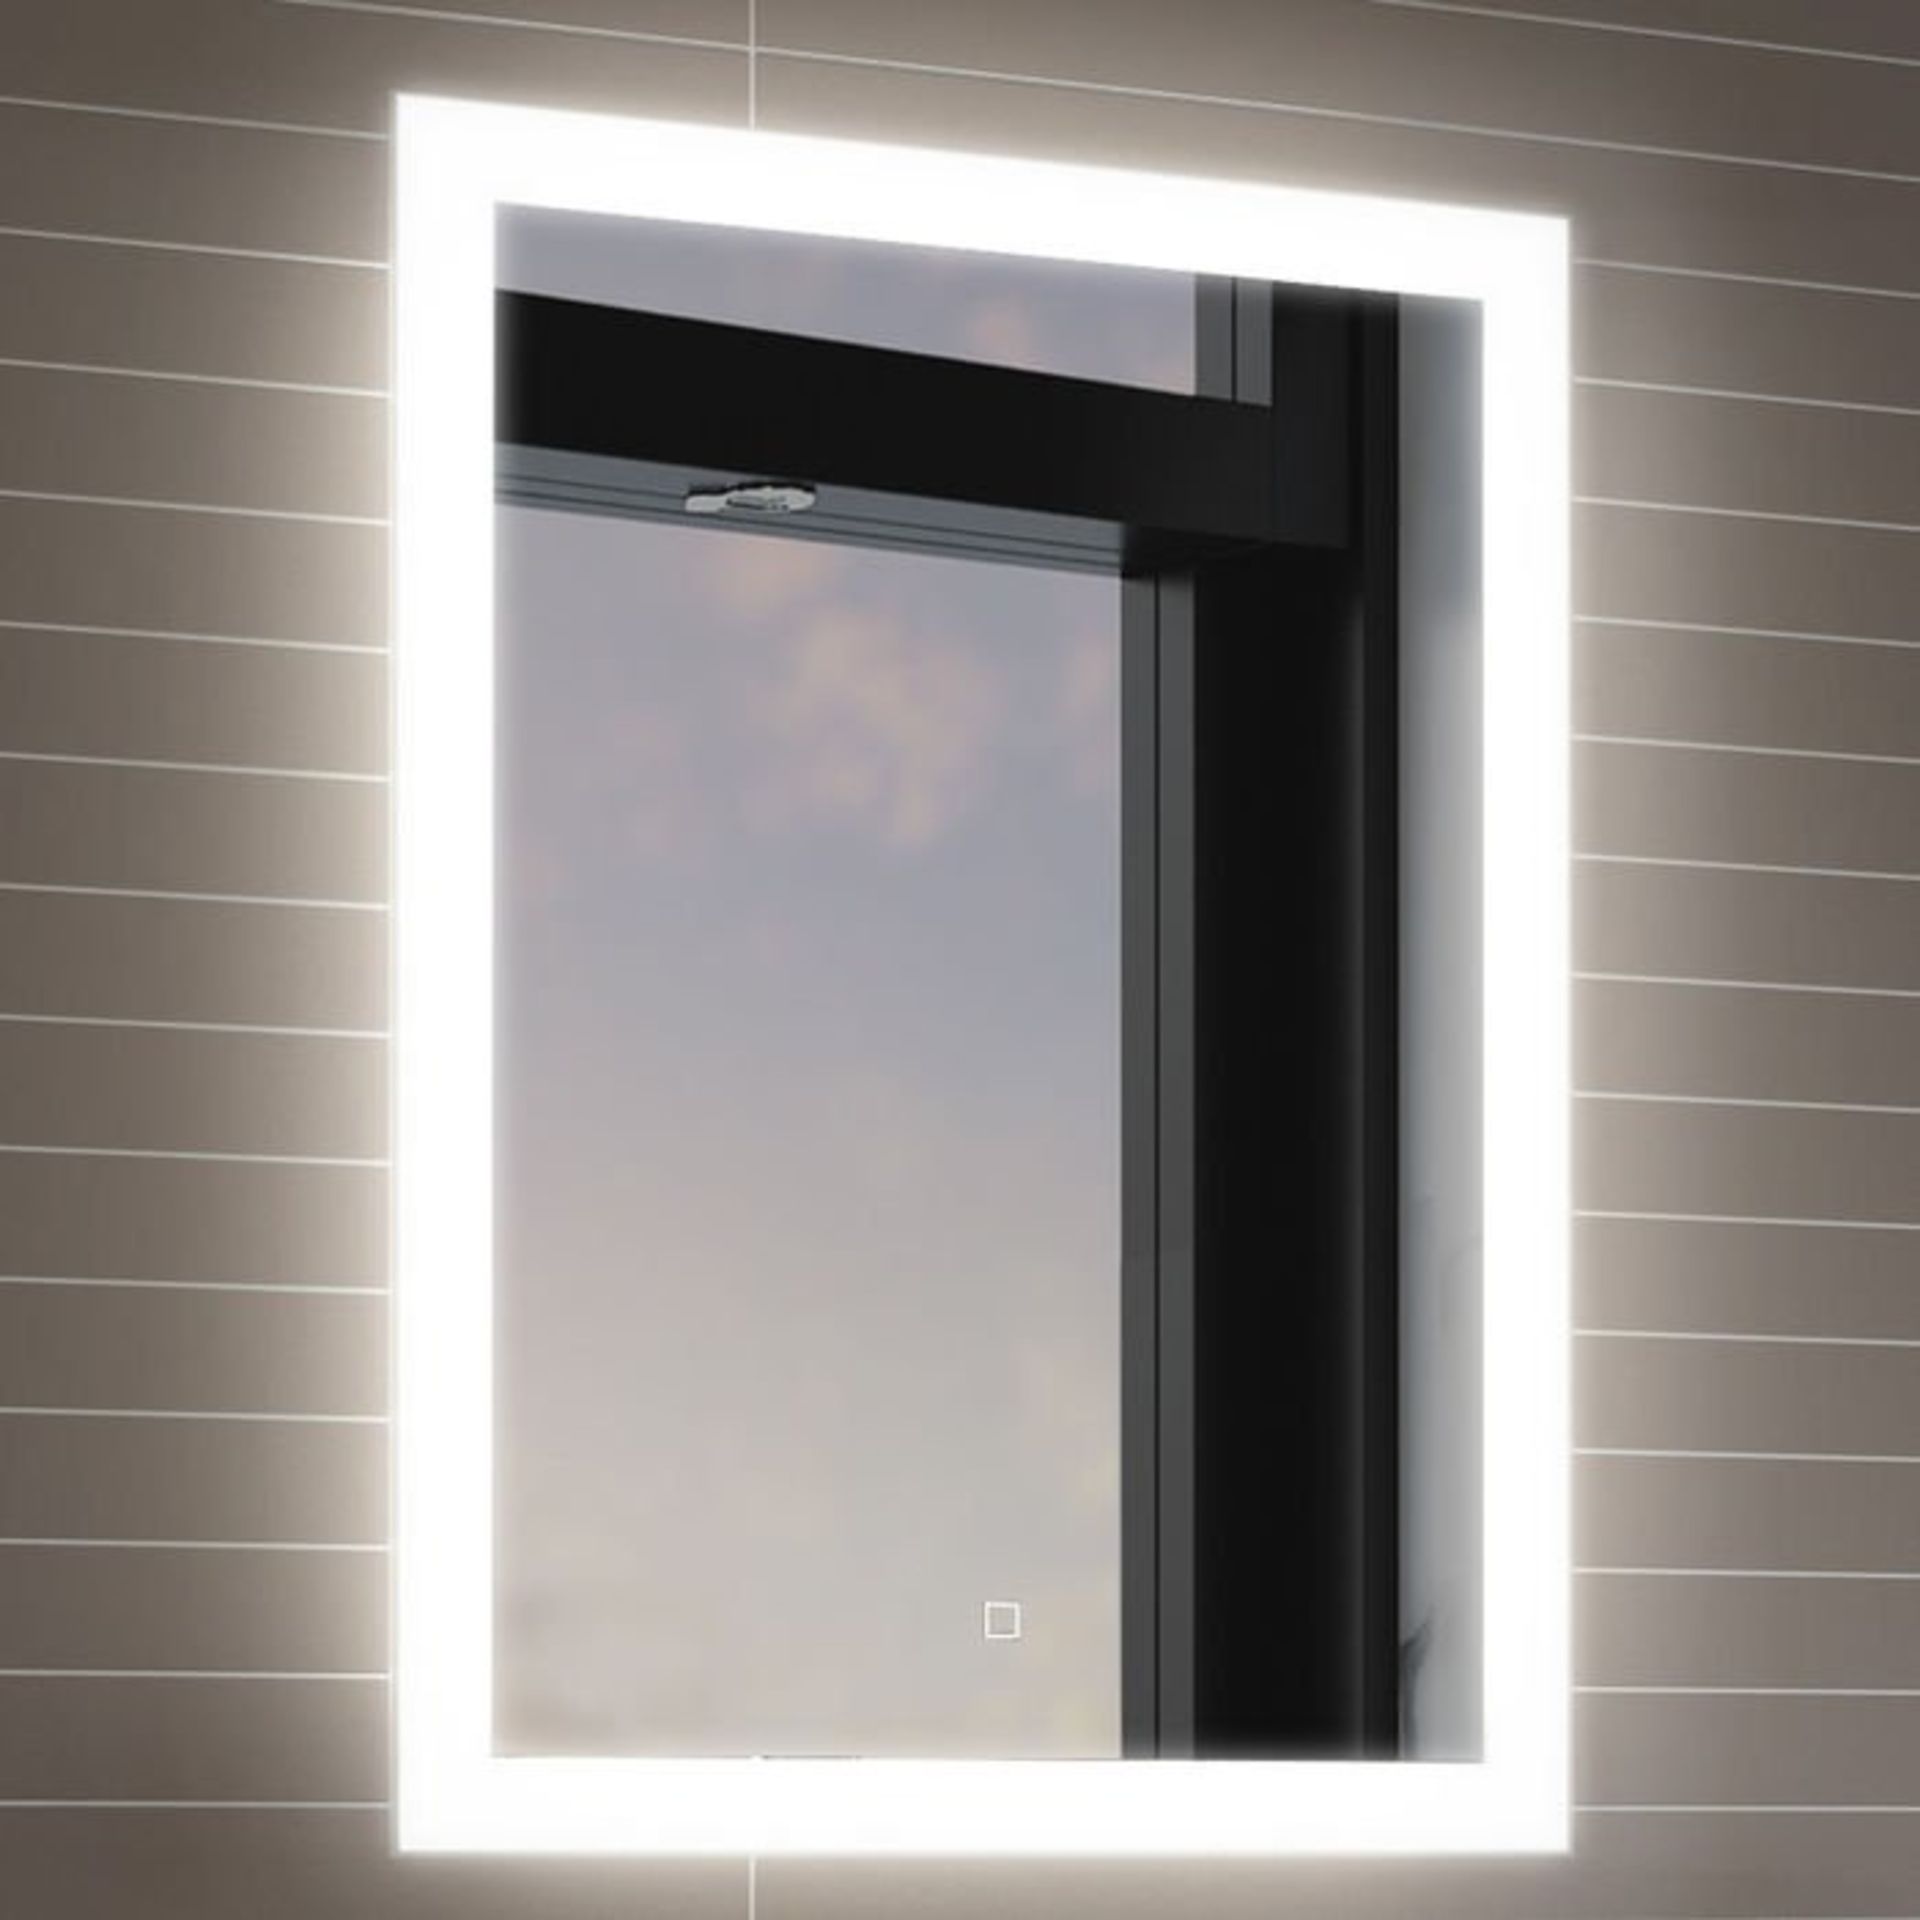 (H16) 700x500mm Orion Illuminated LED Mirror - Switch Control RRP £349.99 Energy efficient LED